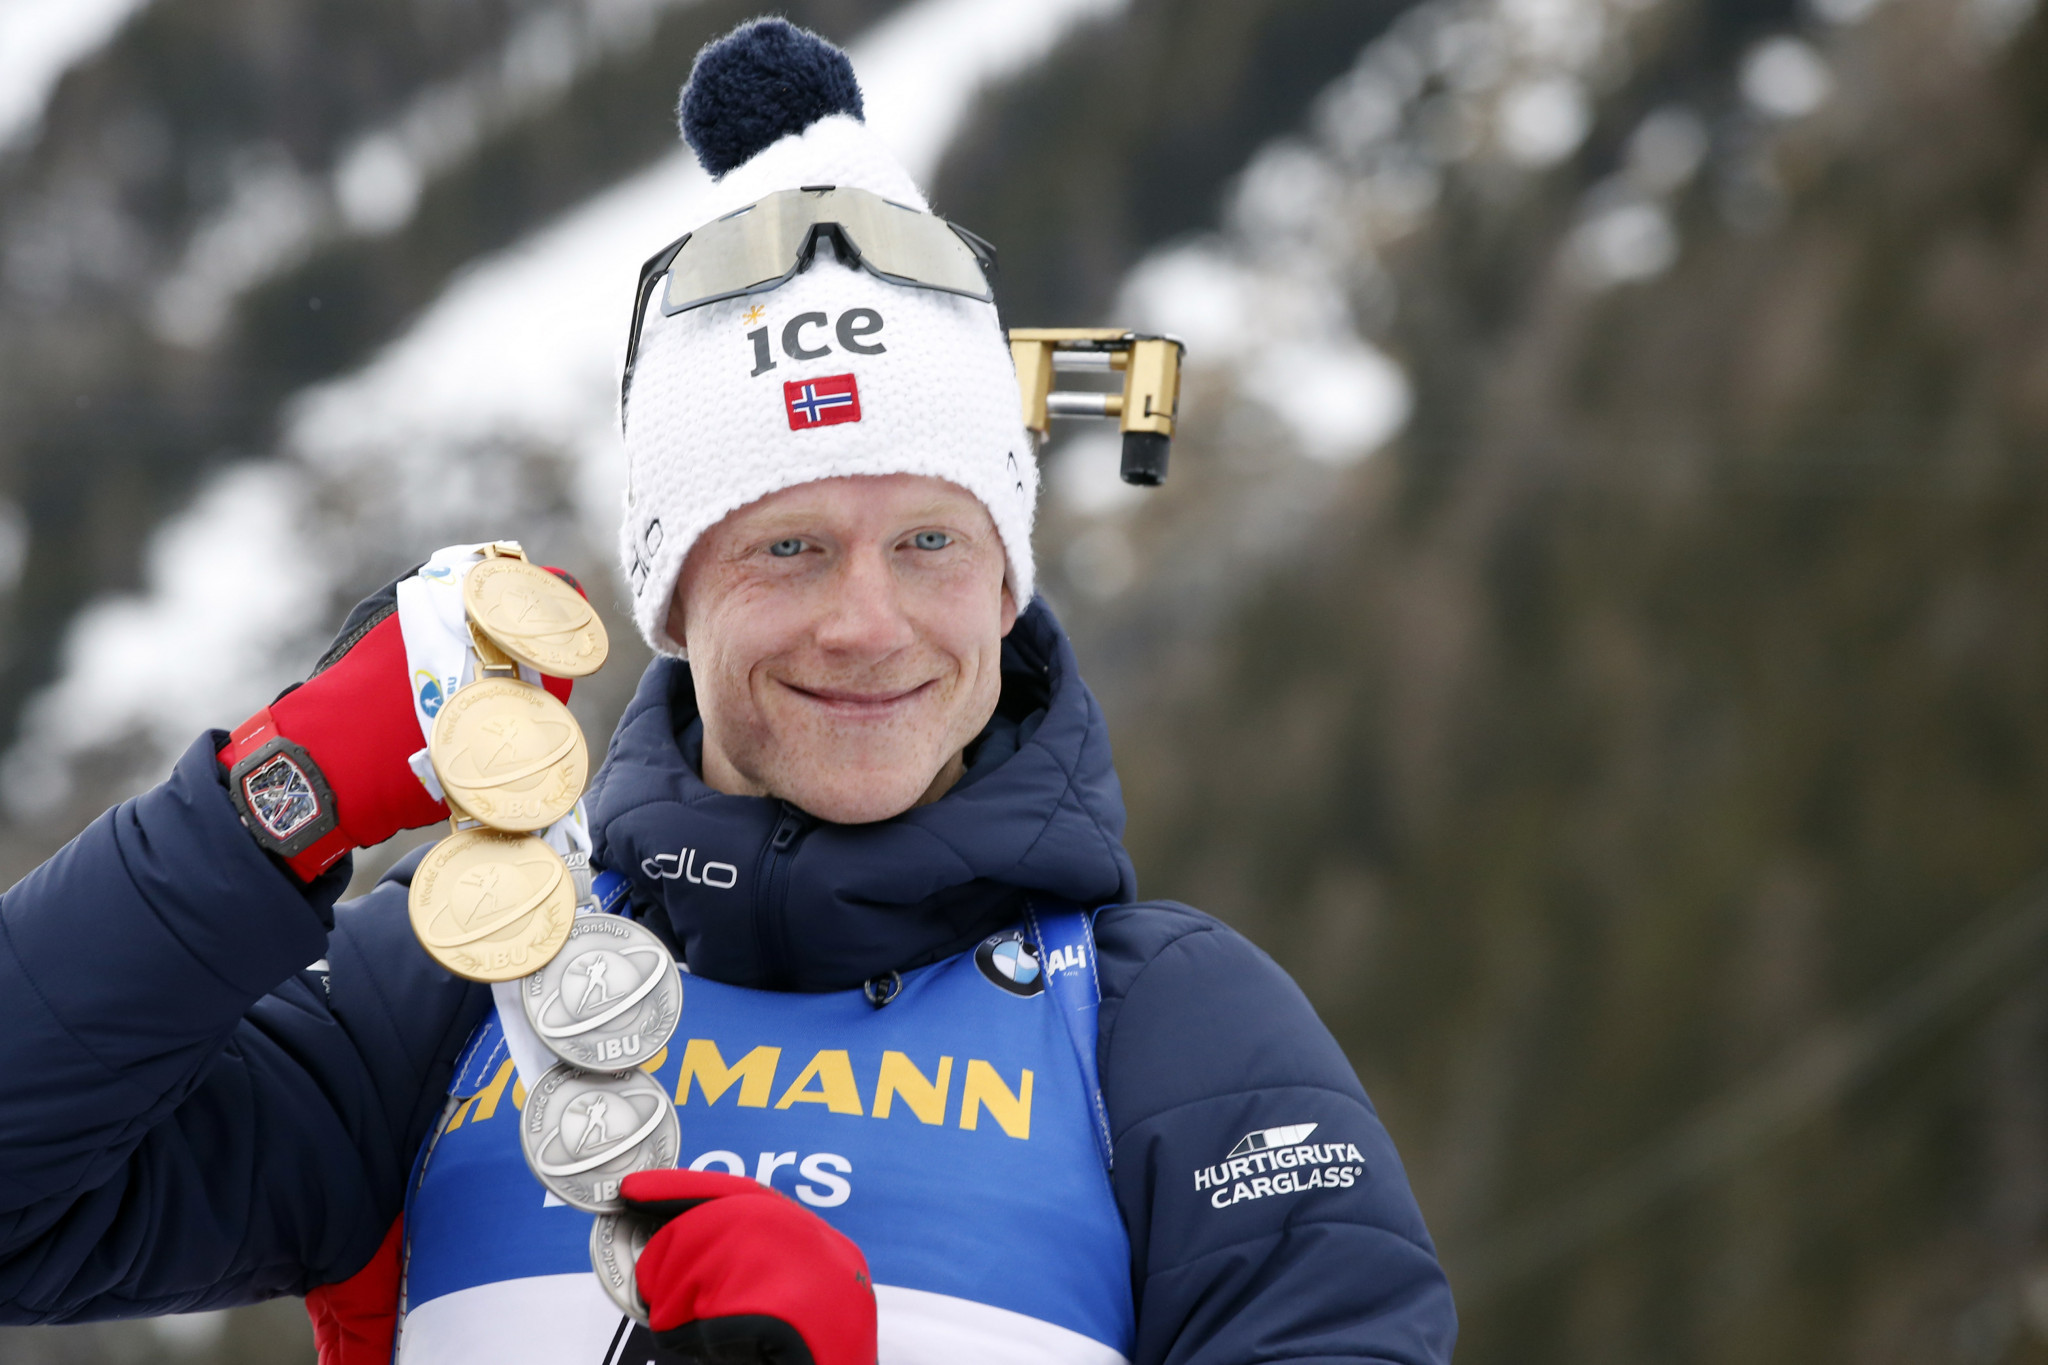 Johannes Thingnes Bø won his third gold medal of the event ©Getty Images